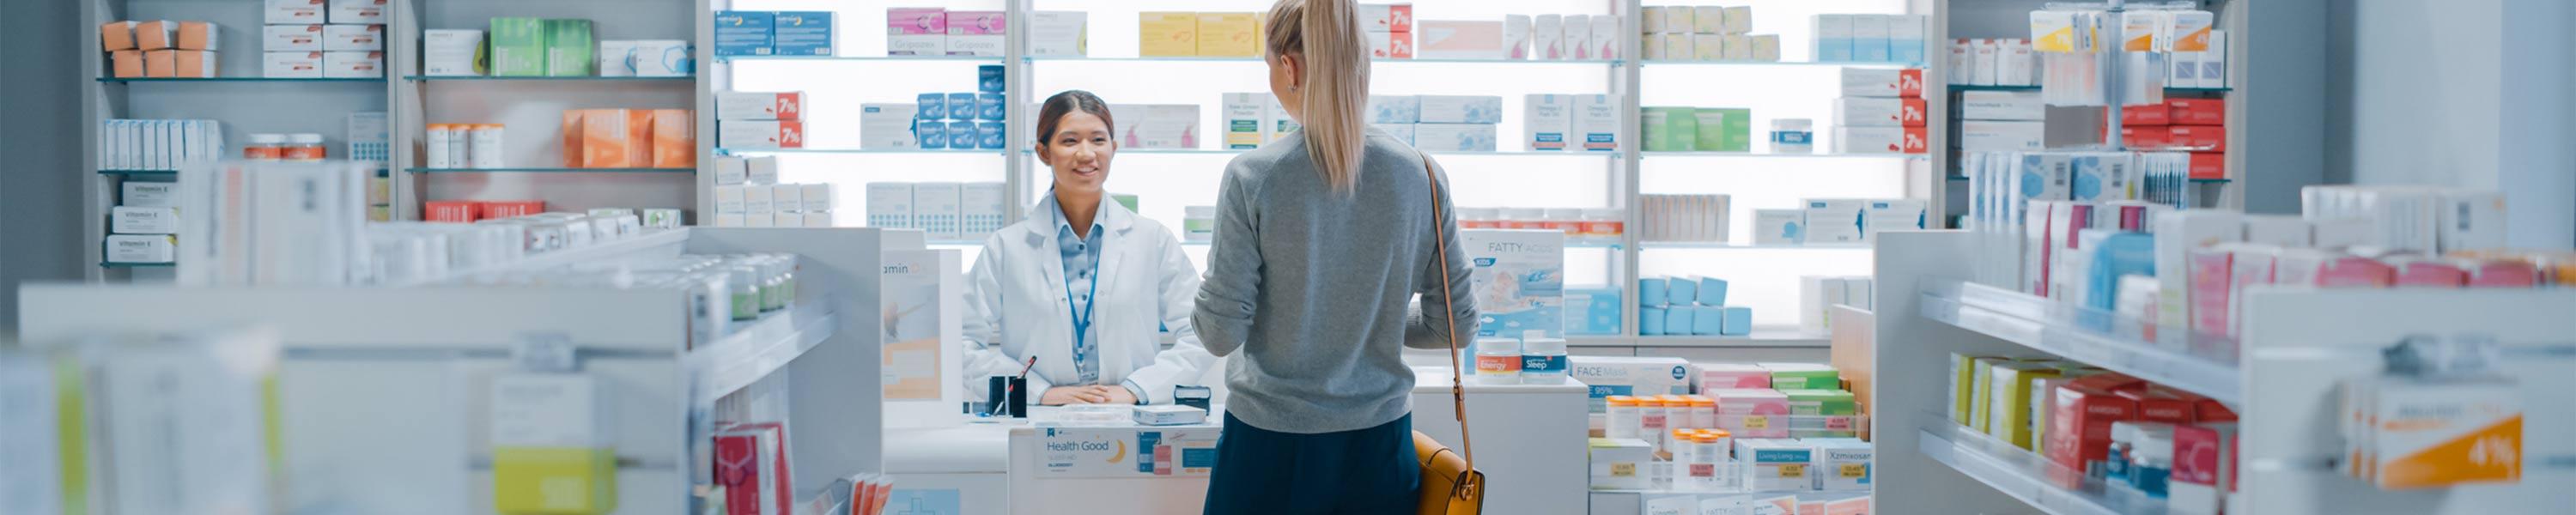 Woman being assisted by a pharmacist